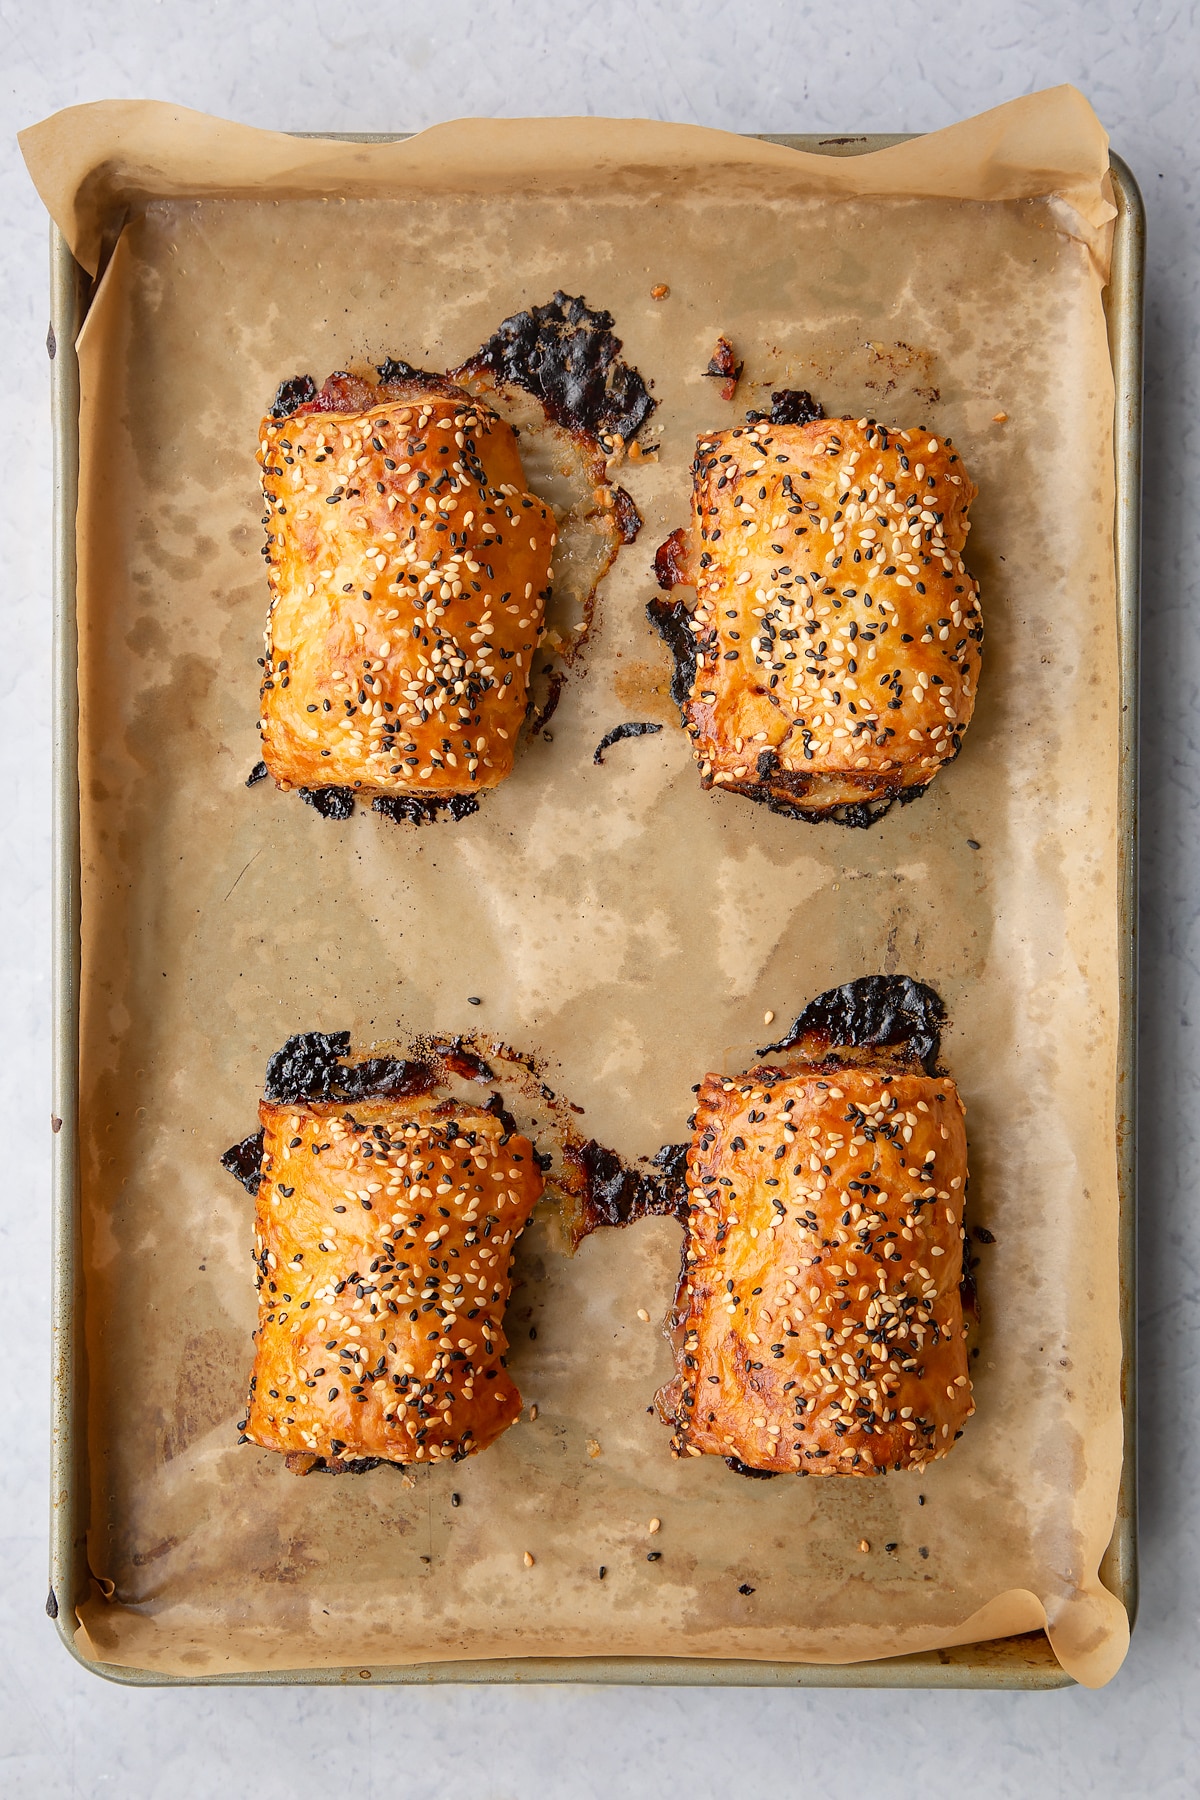 Four freshly baked festive sausage rolls on a baking tray lined with baking paper.